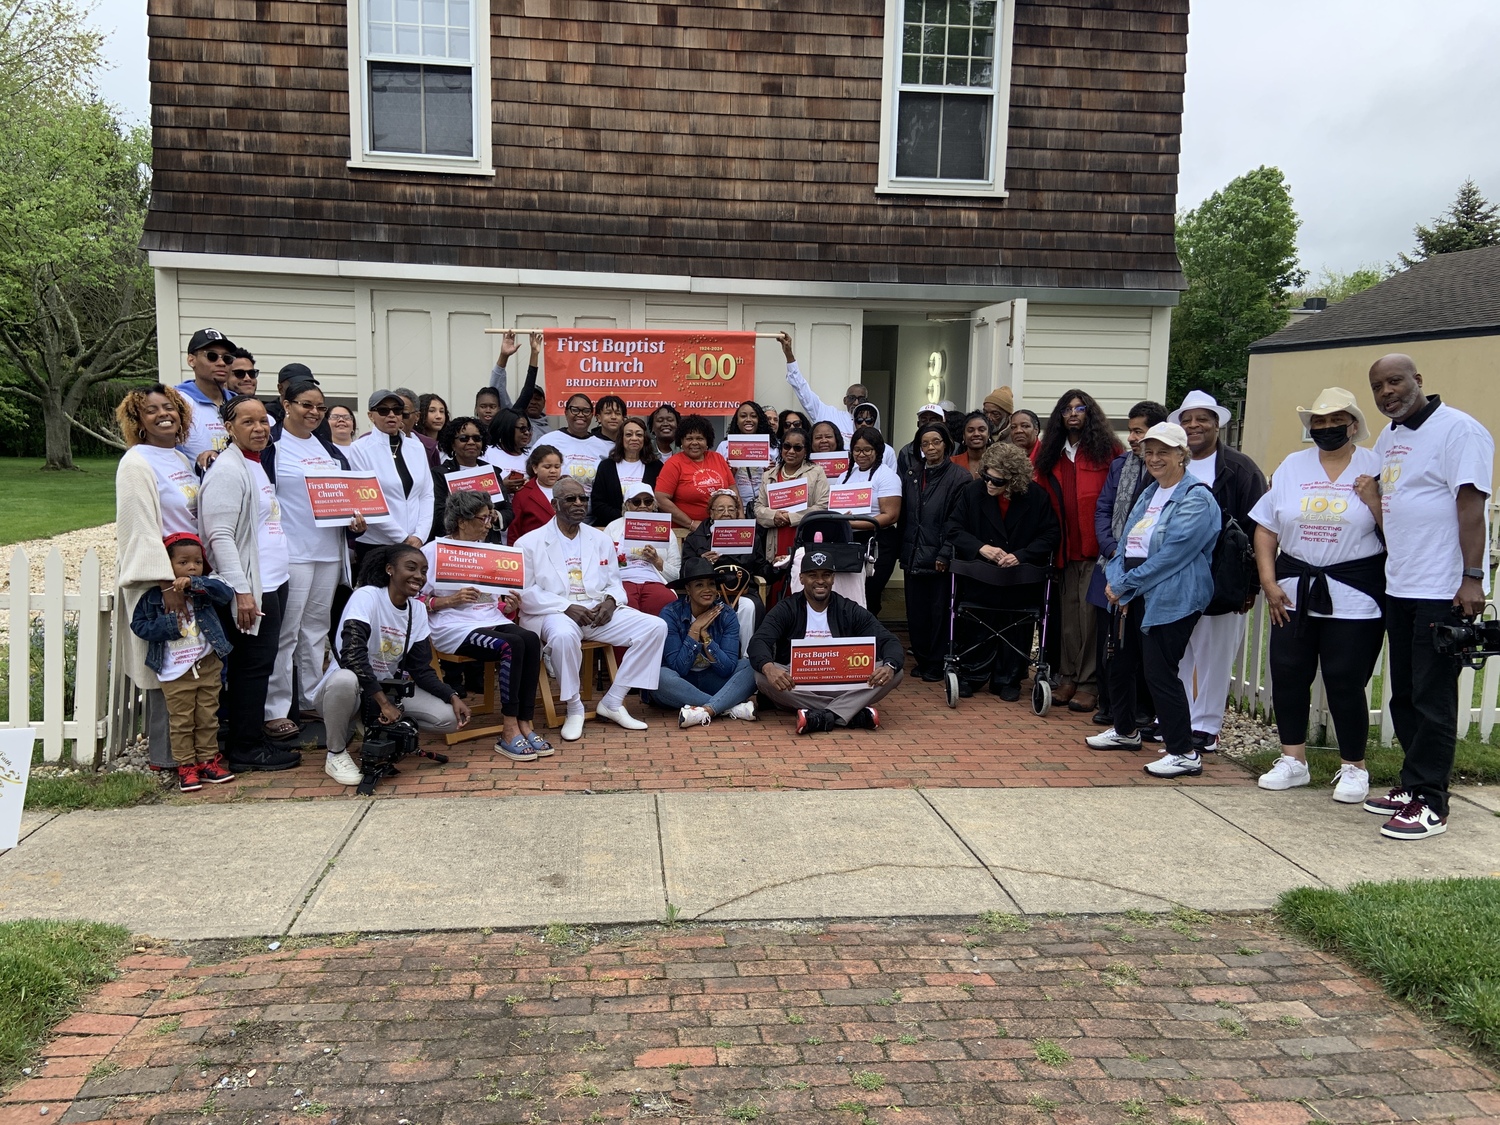 Members of the First Baptist Church of Bridgehampton gather at the congregation's first home on Corwith Avenue before marching to their current church on the Bridgehampton-Sag Harbor Turnpike Sunday, May 19. STEPHEN J. KOTZ